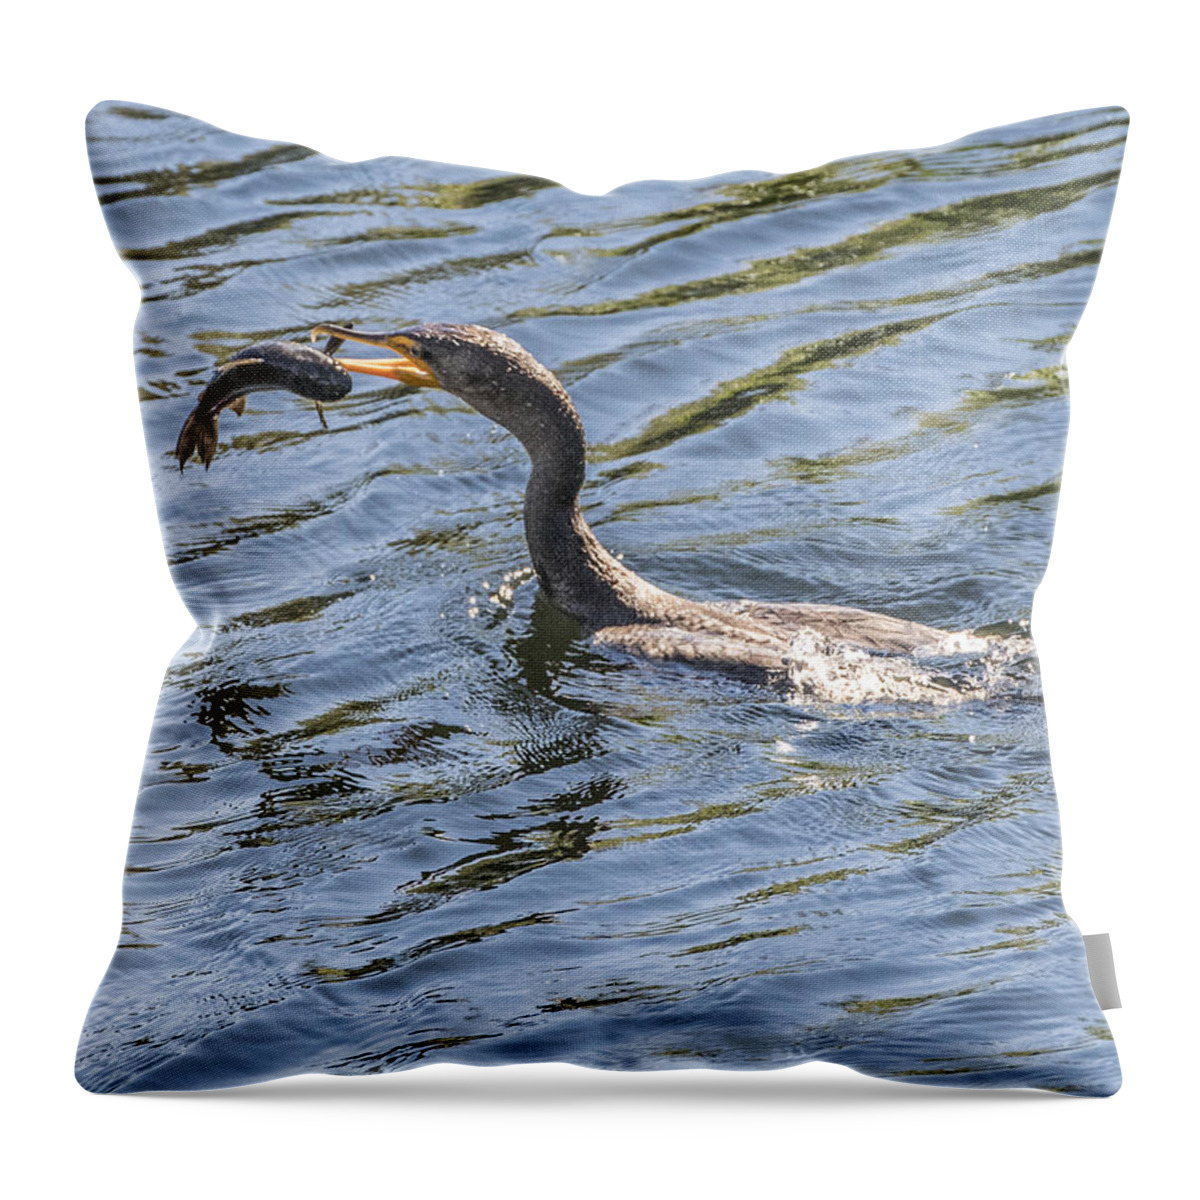 Cormorant Throw Pillow featuring the photograph Cormorant Caught Fish by William Bitman